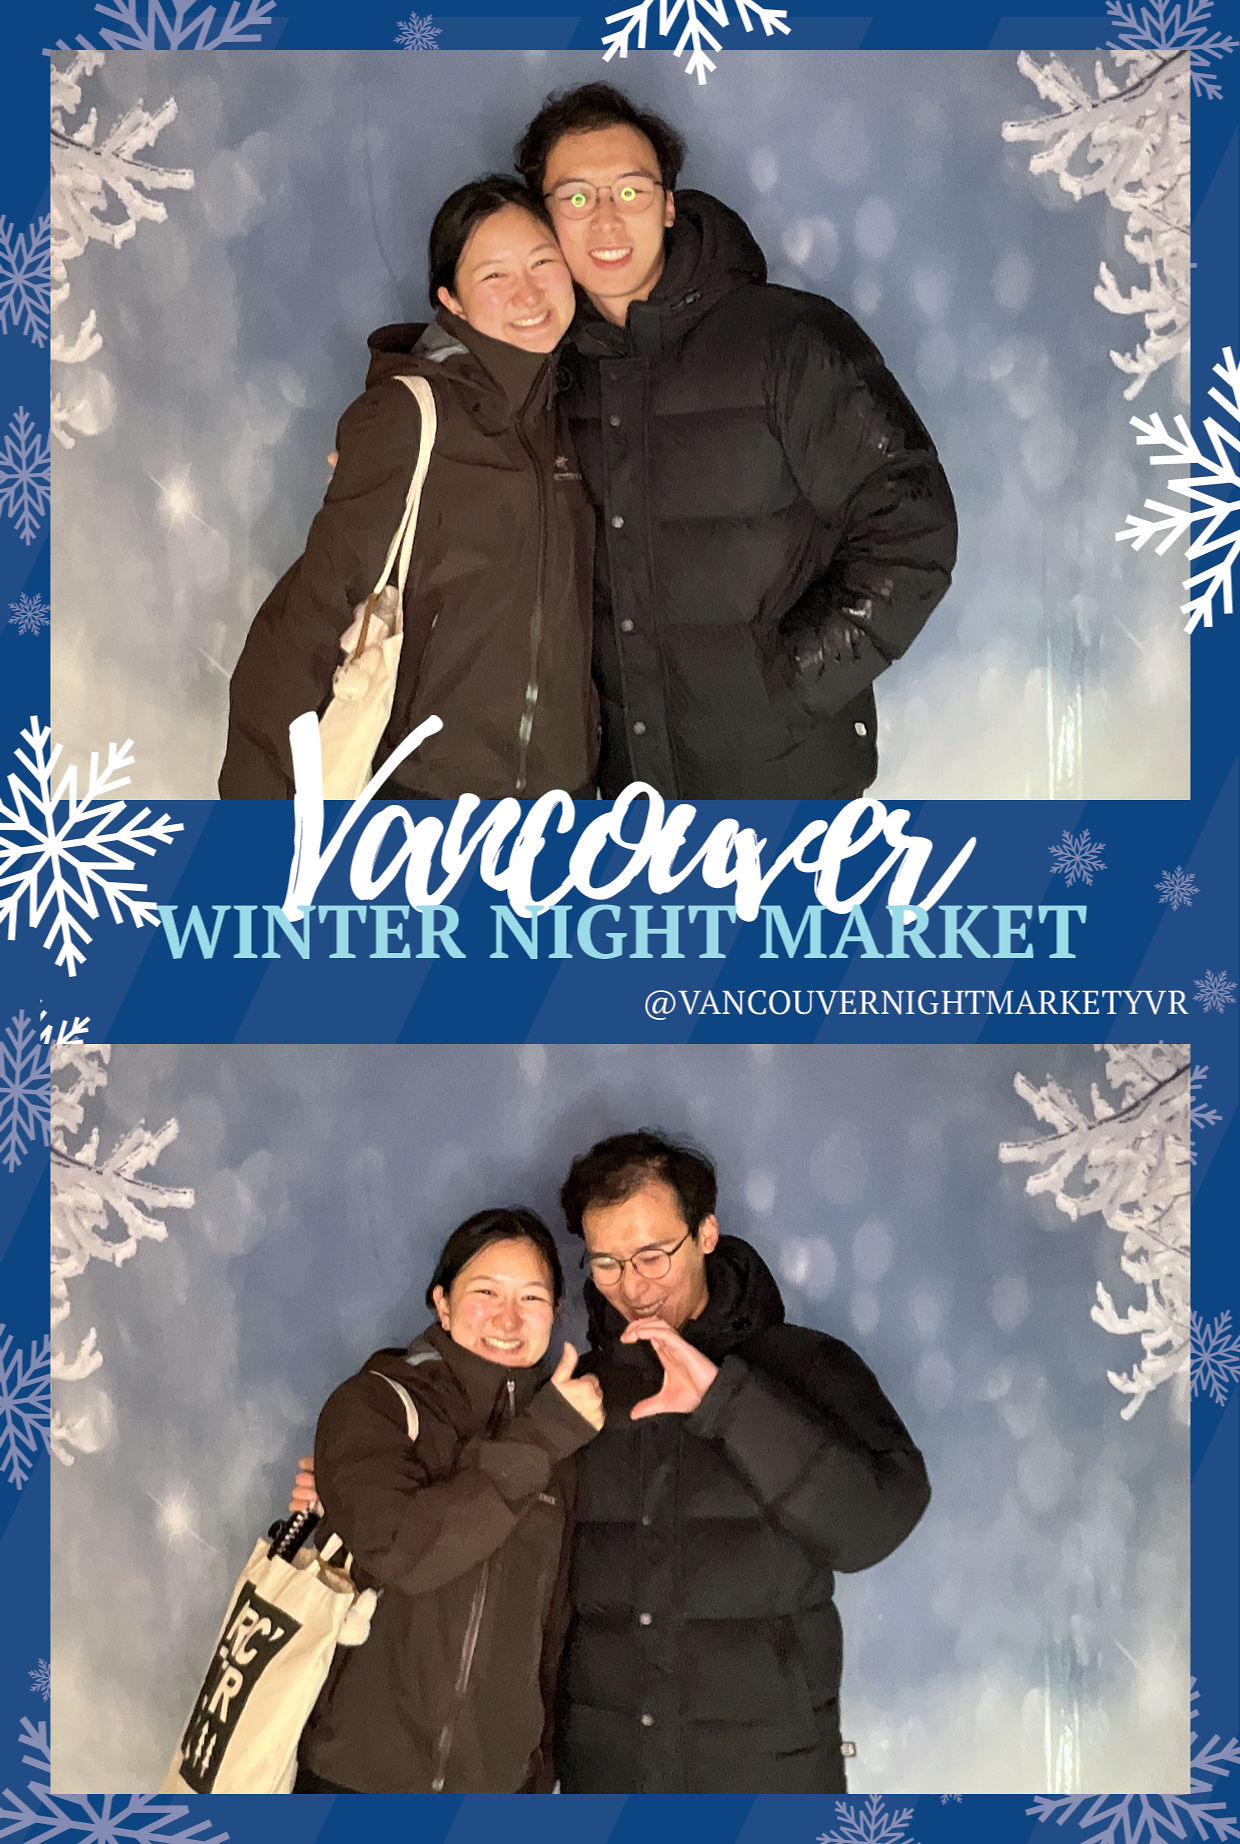 dang good booths, vancouver photo booth, vancouver night market, vancity photo booth, photo booth, art gallery, winter night market, selfie booth, print booth